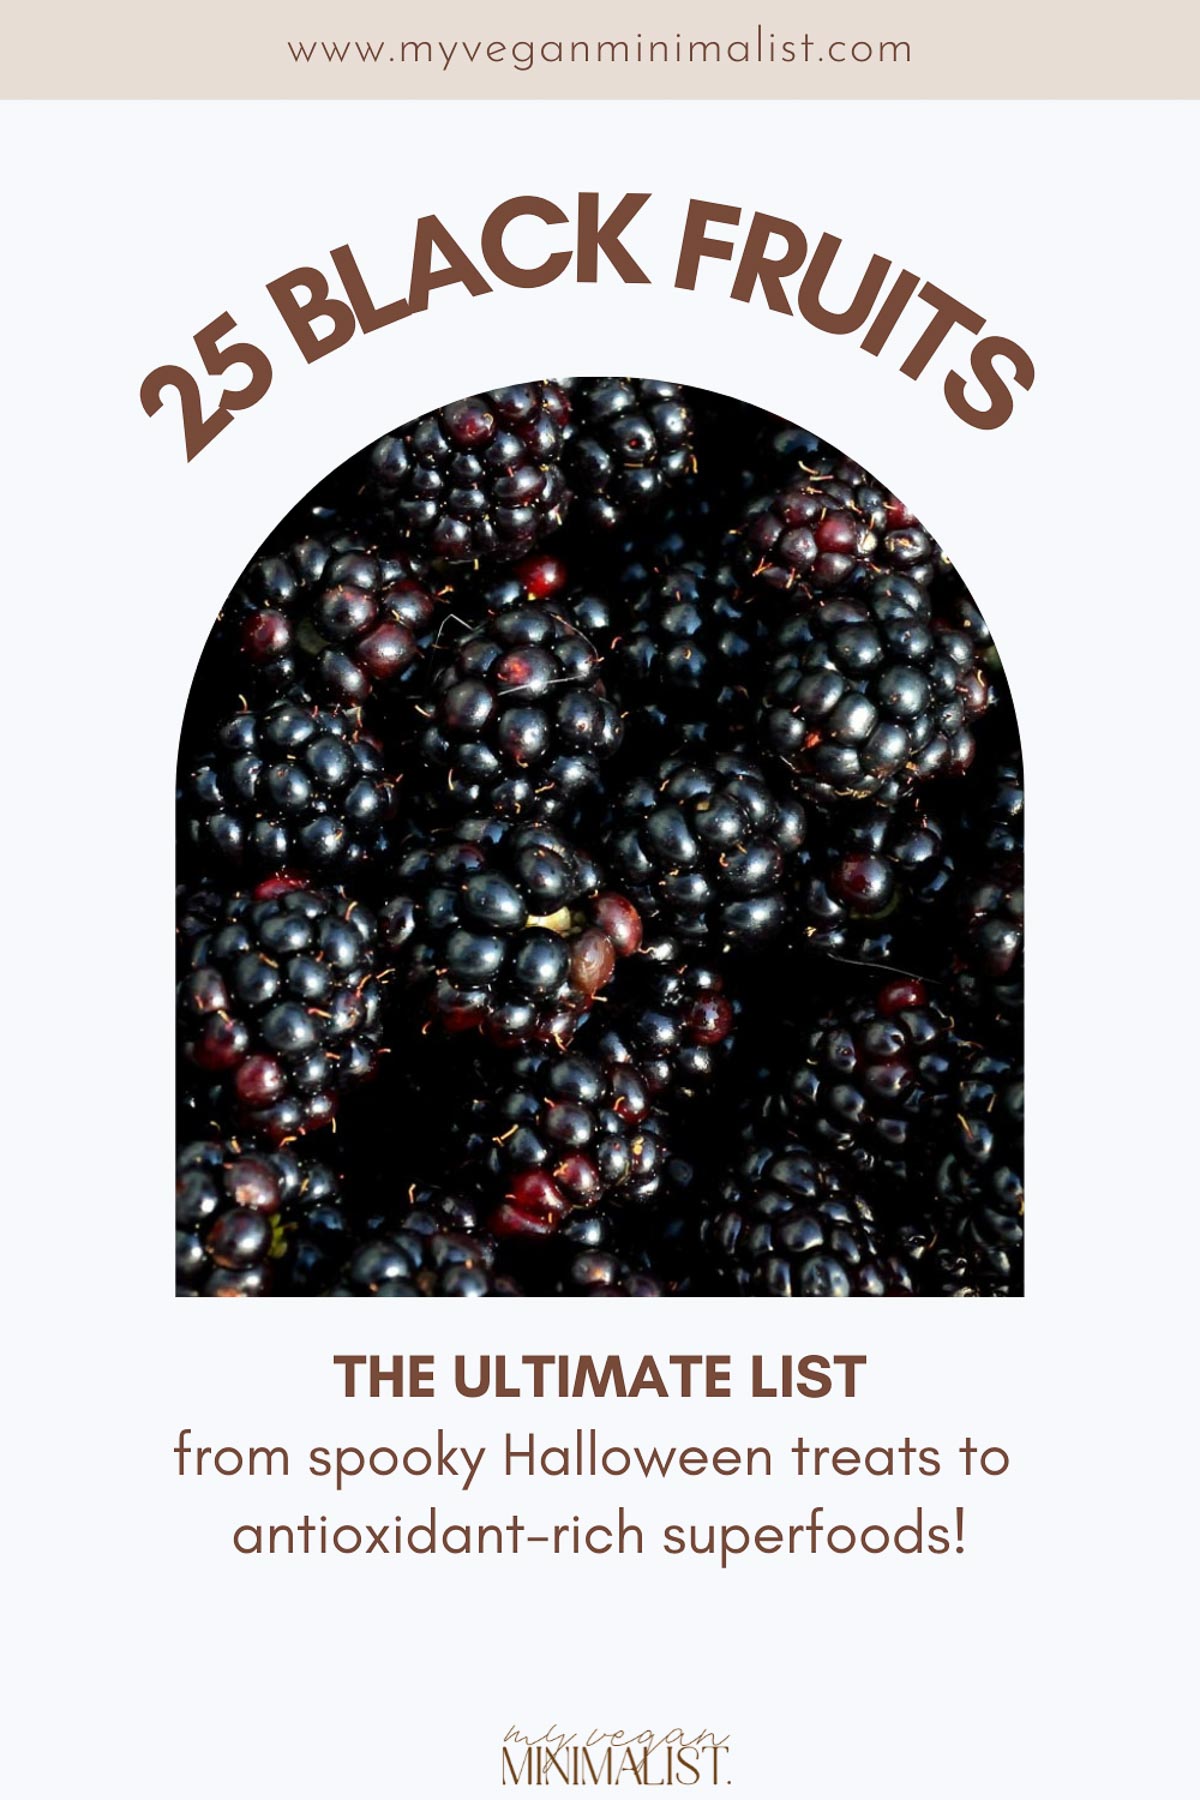 A graphic with a photo of blackberries in the middle and the text 25 Black Fruits around it.